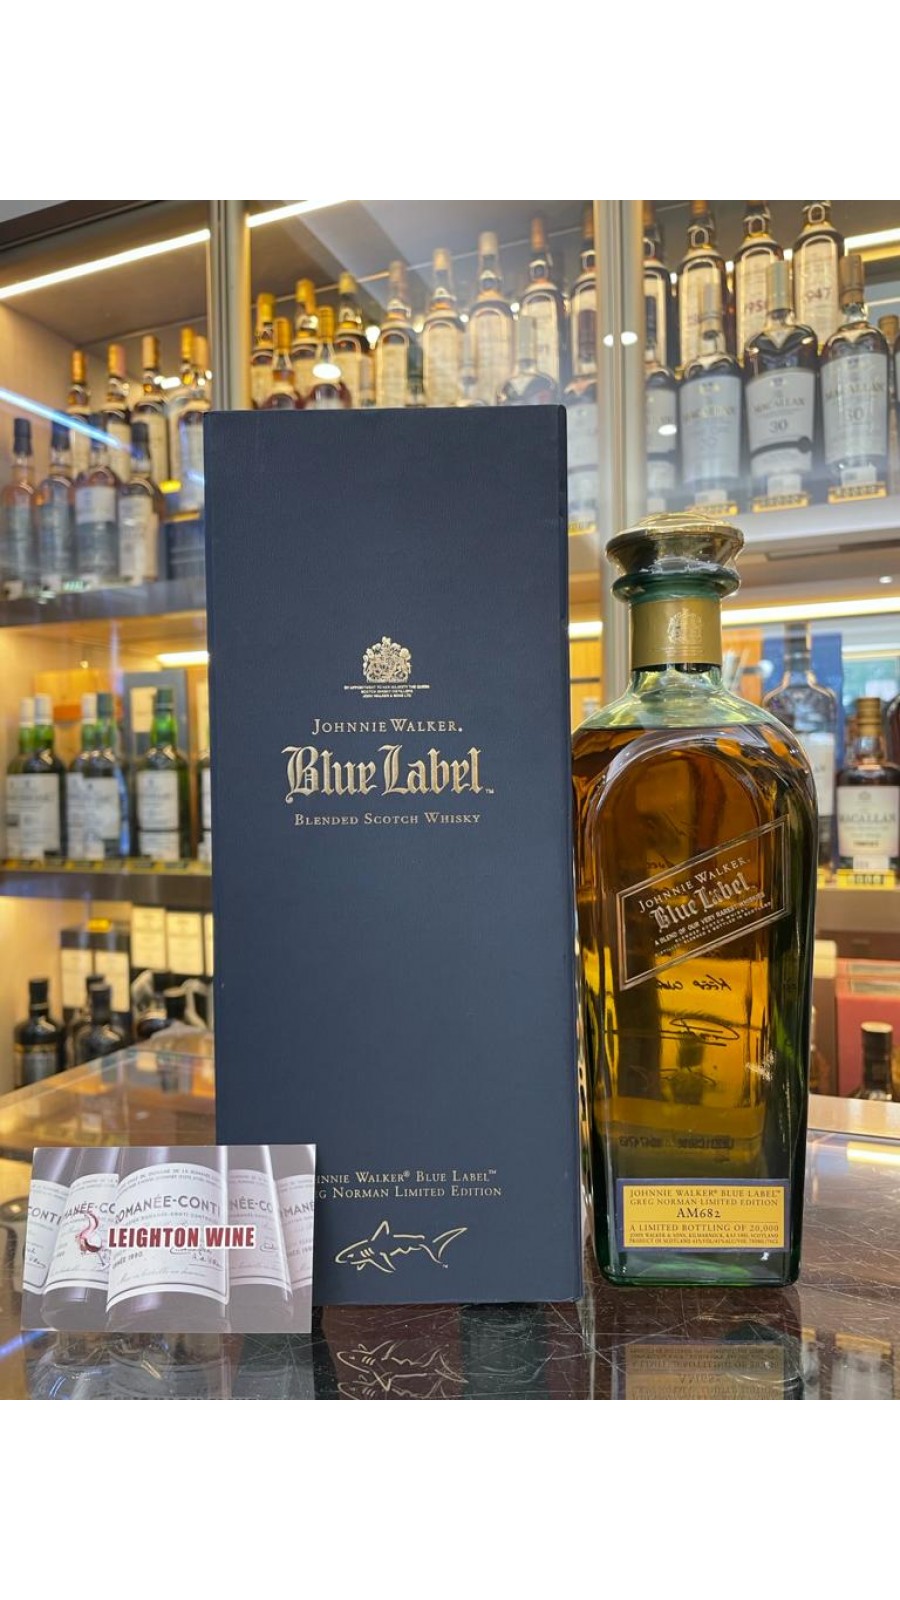 Johnnie Walker Blue Label Greg Norman Limited Edition Blended Scotch Whisky (700ml)